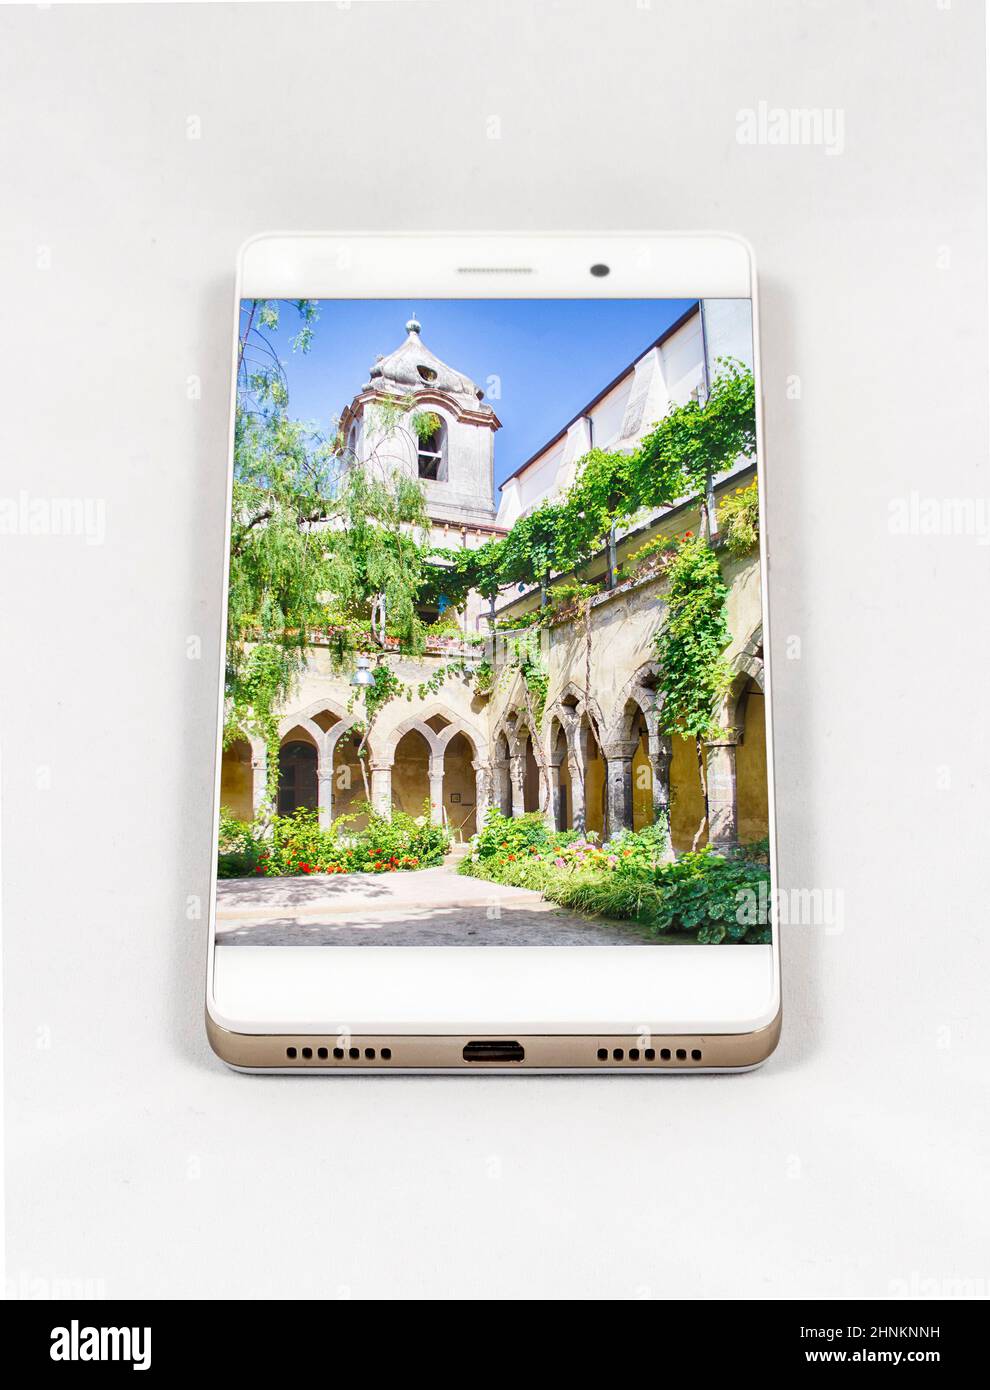 Modern smartphone displaying full screen picture of a cloister, Italy Stock Photo